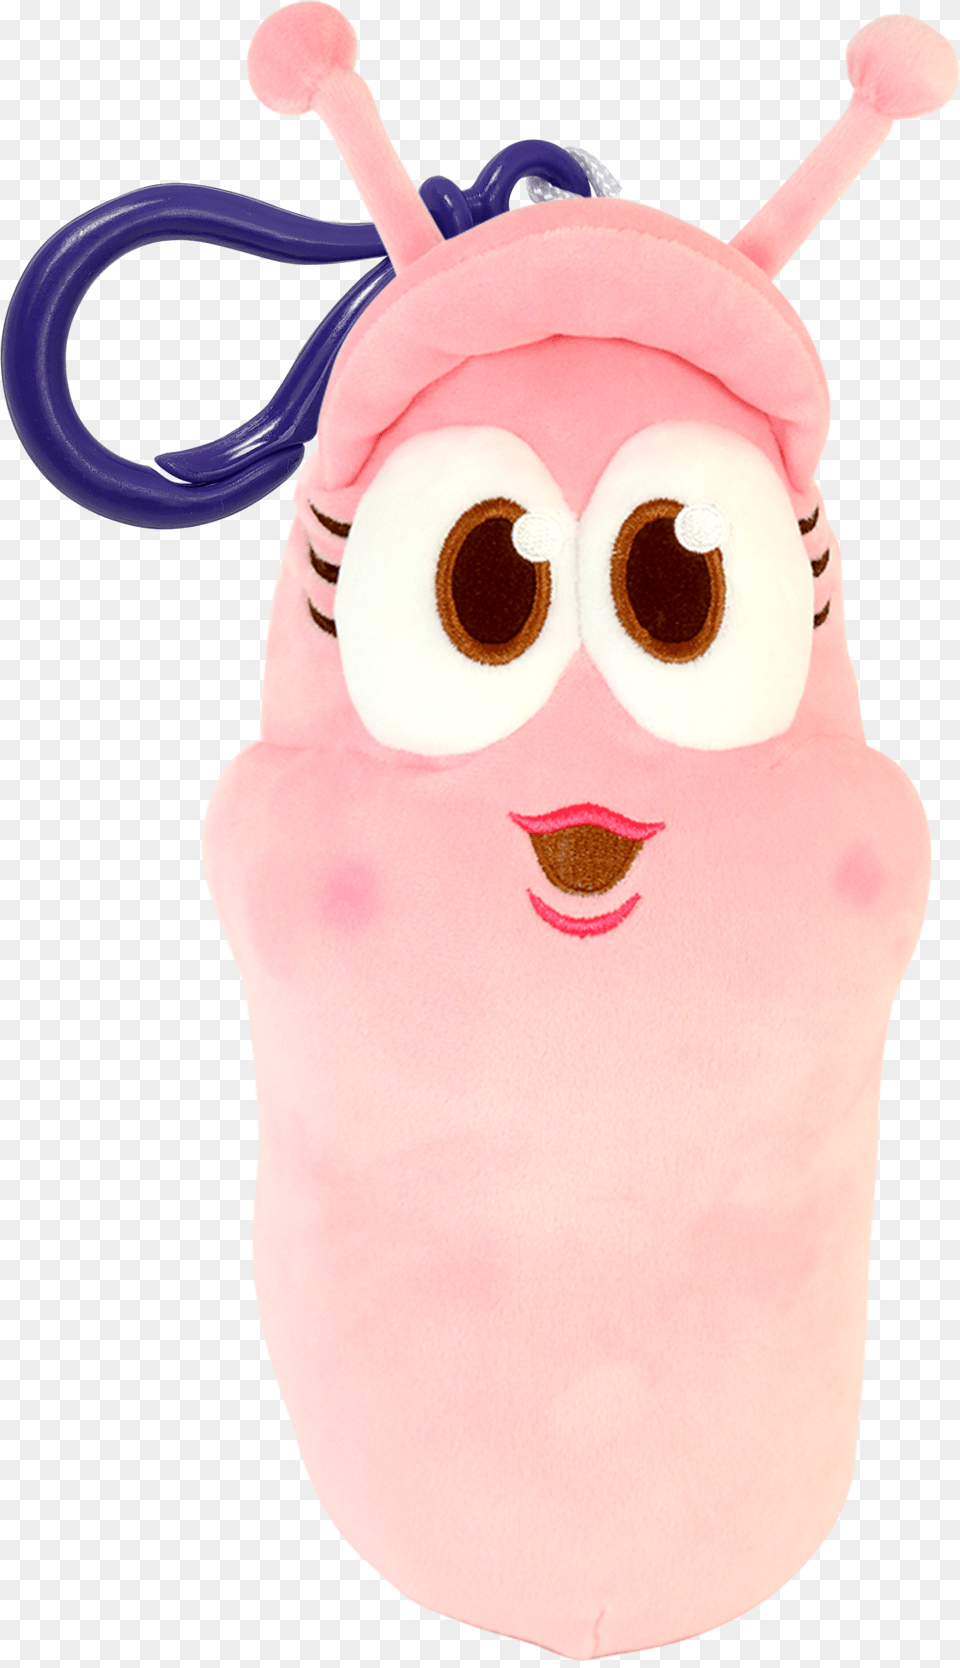 Pinklarvabpclip Stuffed Toy Free Png Download